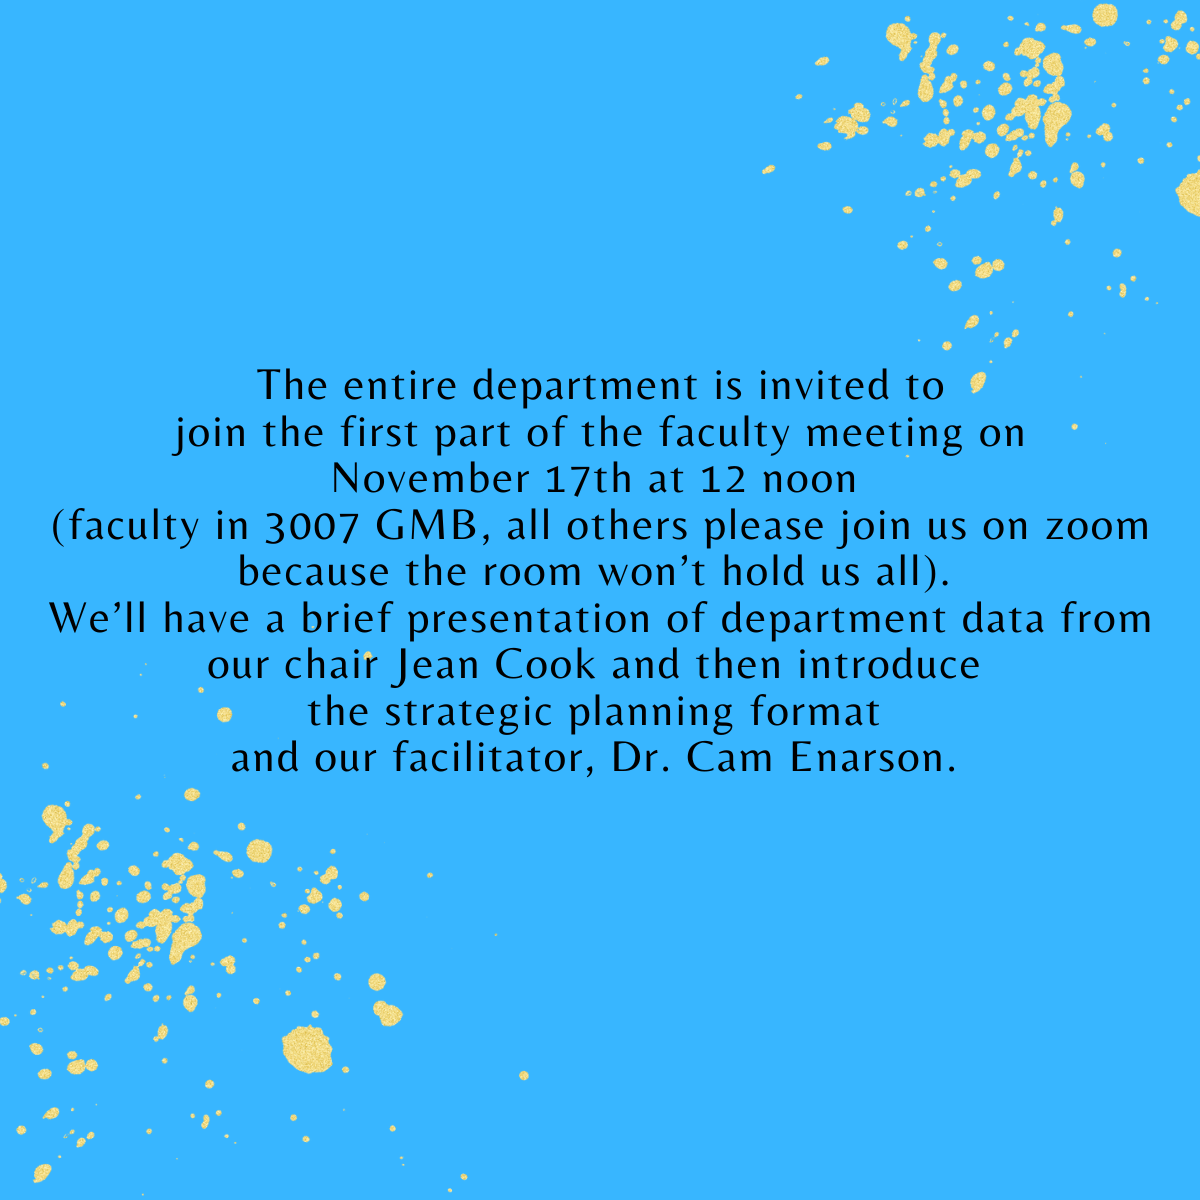 Blue background with yellow dots on sides, text "The entire department is invited to join the first part of the faculty meeting on November 17th at 12 noon (faculty in 3007 GMB, all others please join us on zoom because the room won’t hold us all). We’ll have a brief presentation of department data from our chair Jean Cook and then introduce the strategic planning format and our facilitator, Dr. Cam Enarson."